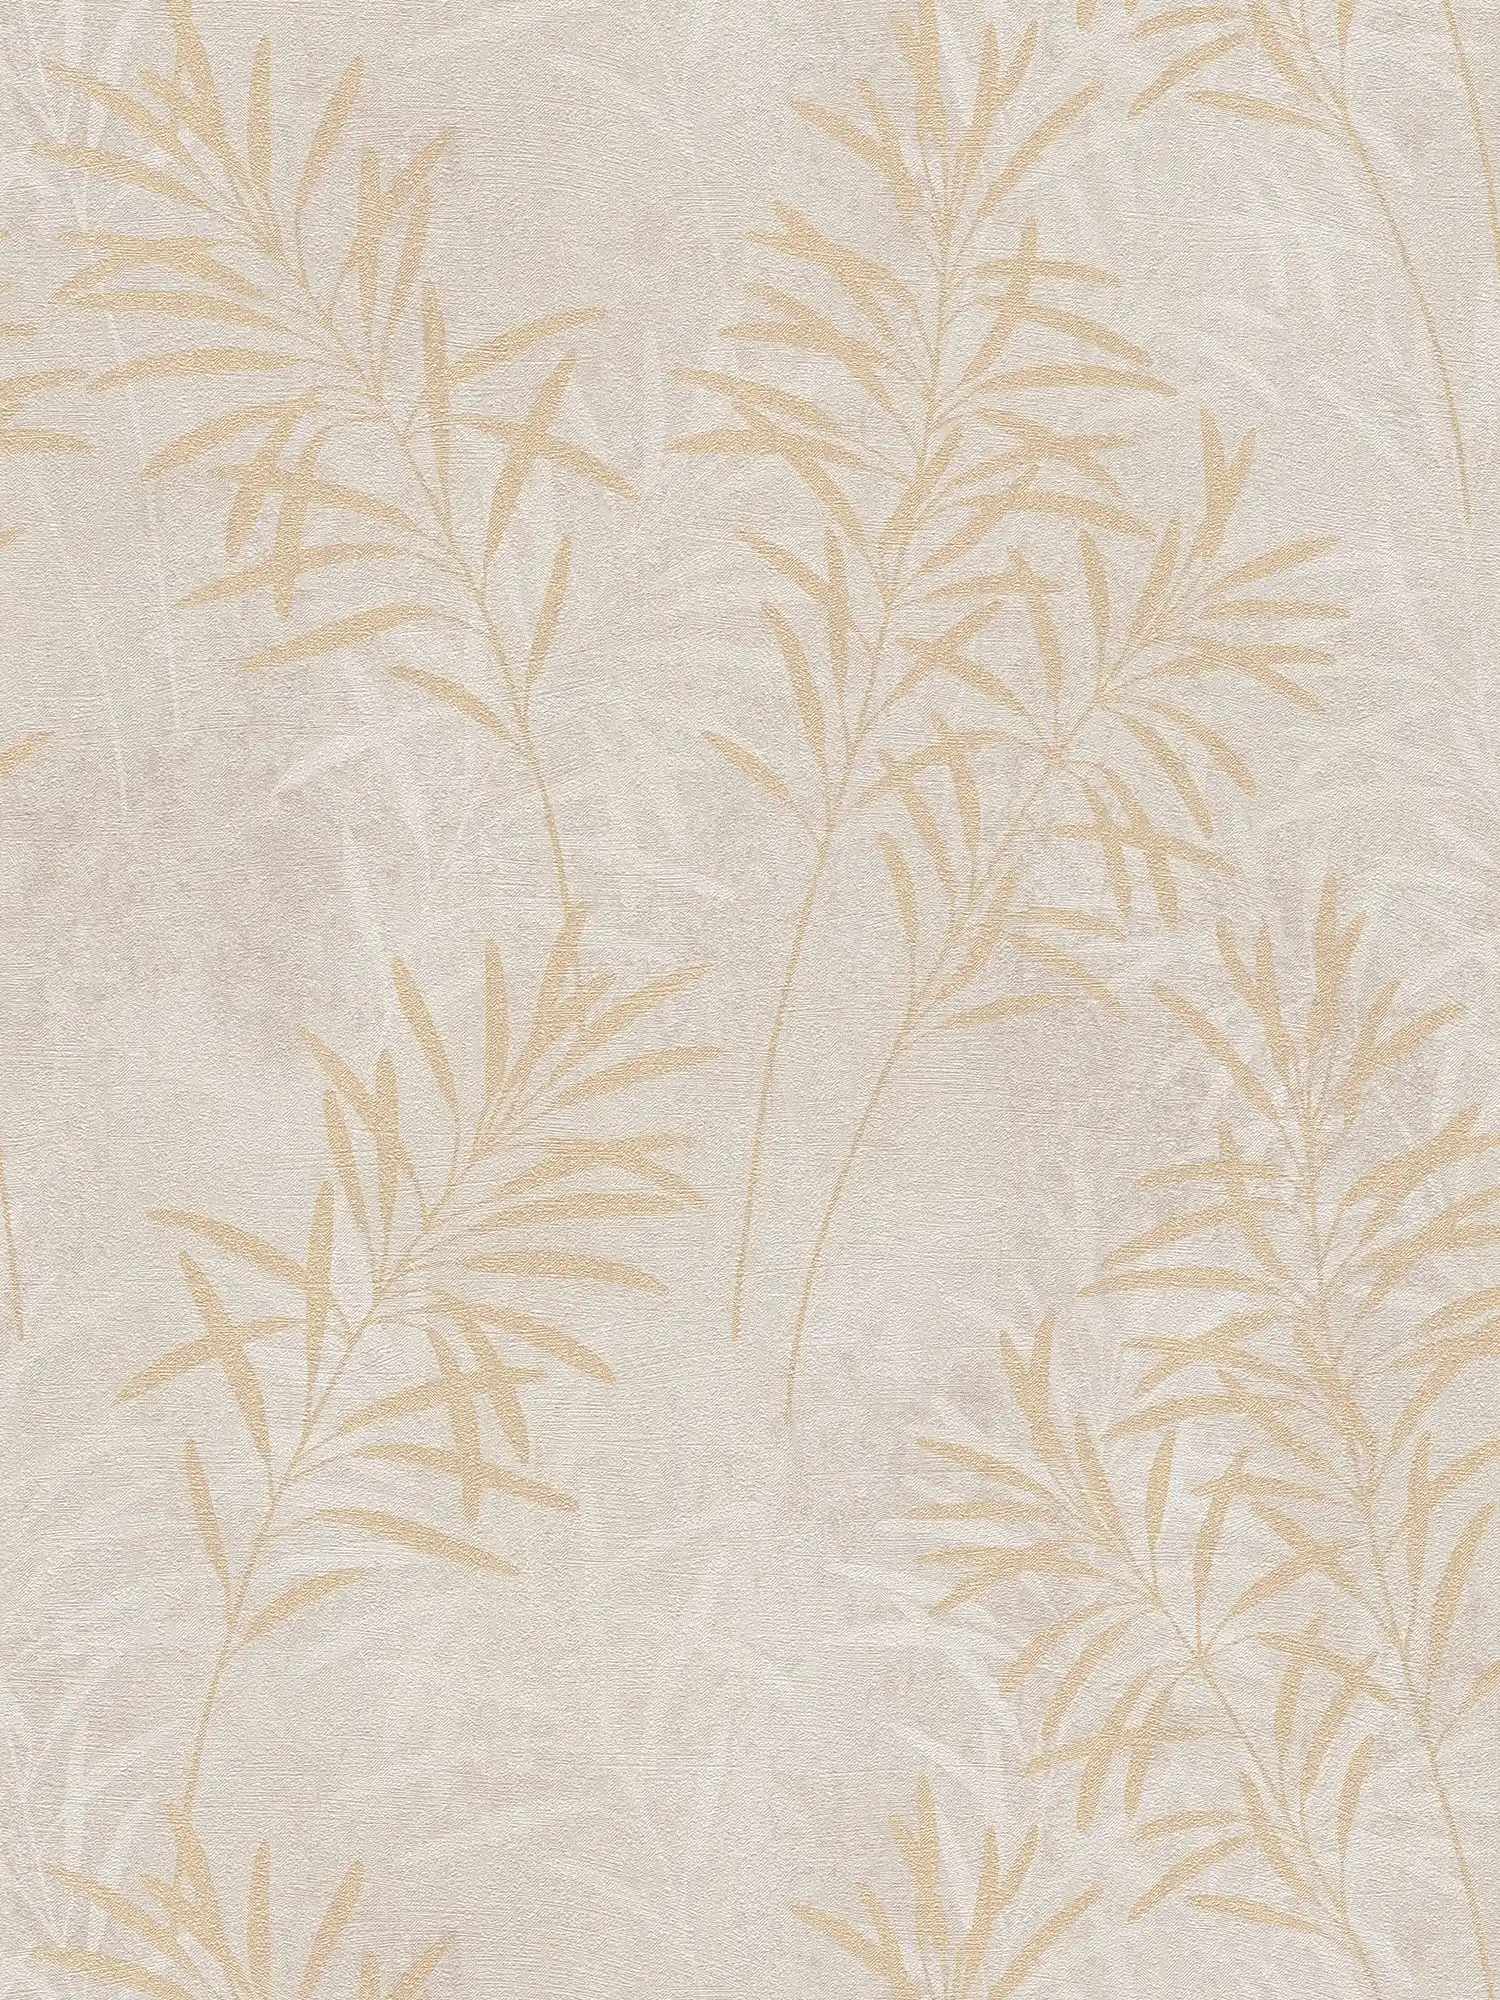 Non-woven wallpaper with floral palm tree pattern - cream, grey, gold
